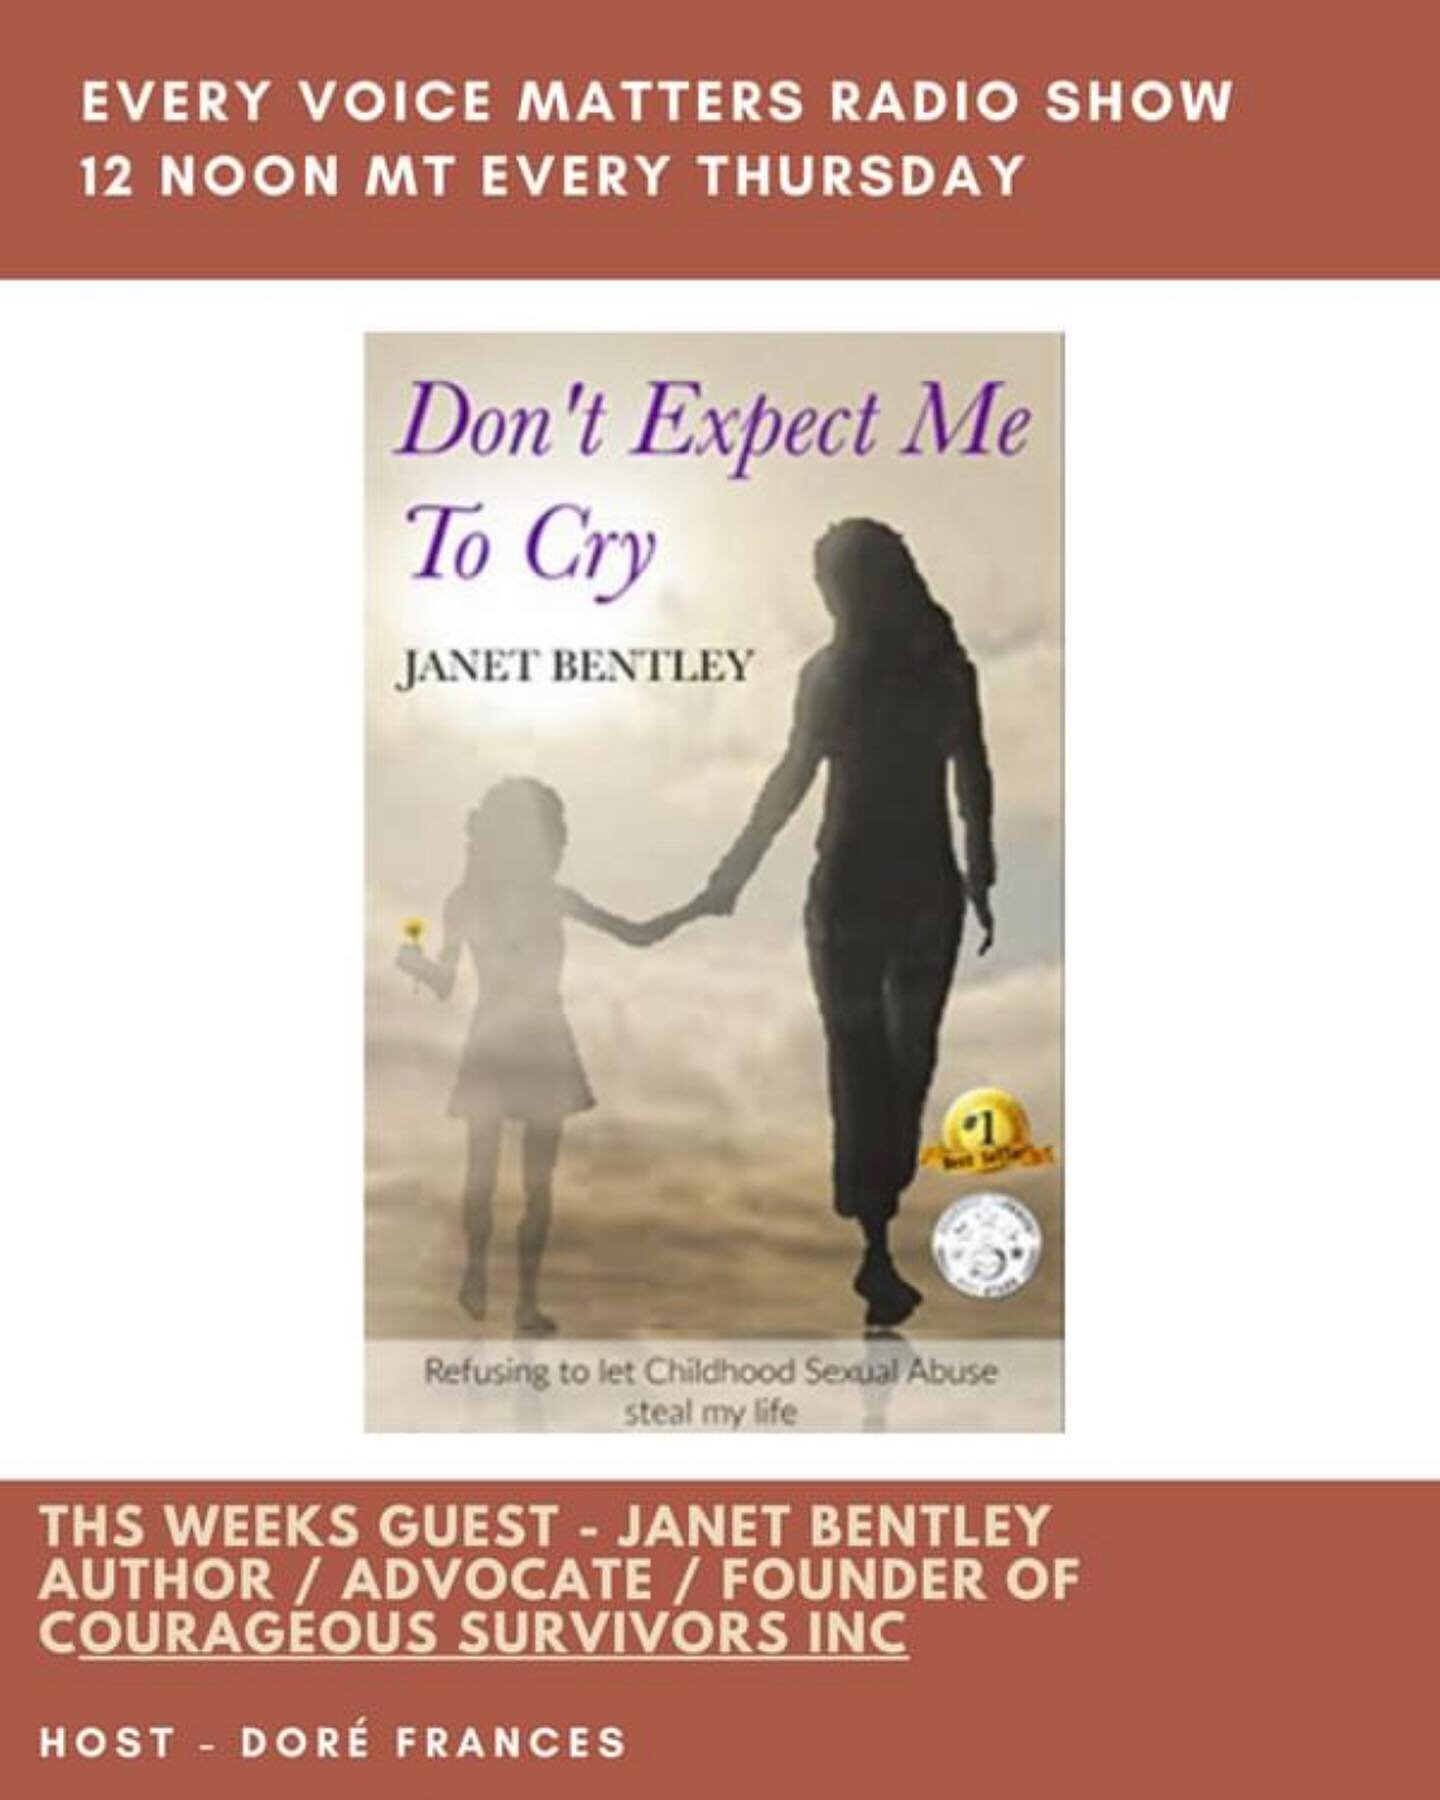 Join us Live tomorrow!!

Every Voice Matters Weekly Radio Show

Every Thursday at 12 noon MT on 
LA TALKRADIO

Watch live on LA TALKRADIO FACEBOOK

This weeks guest is author and advocate Janet Bentley 
Book - Don't Expect Me To Cry
Founder of Courag